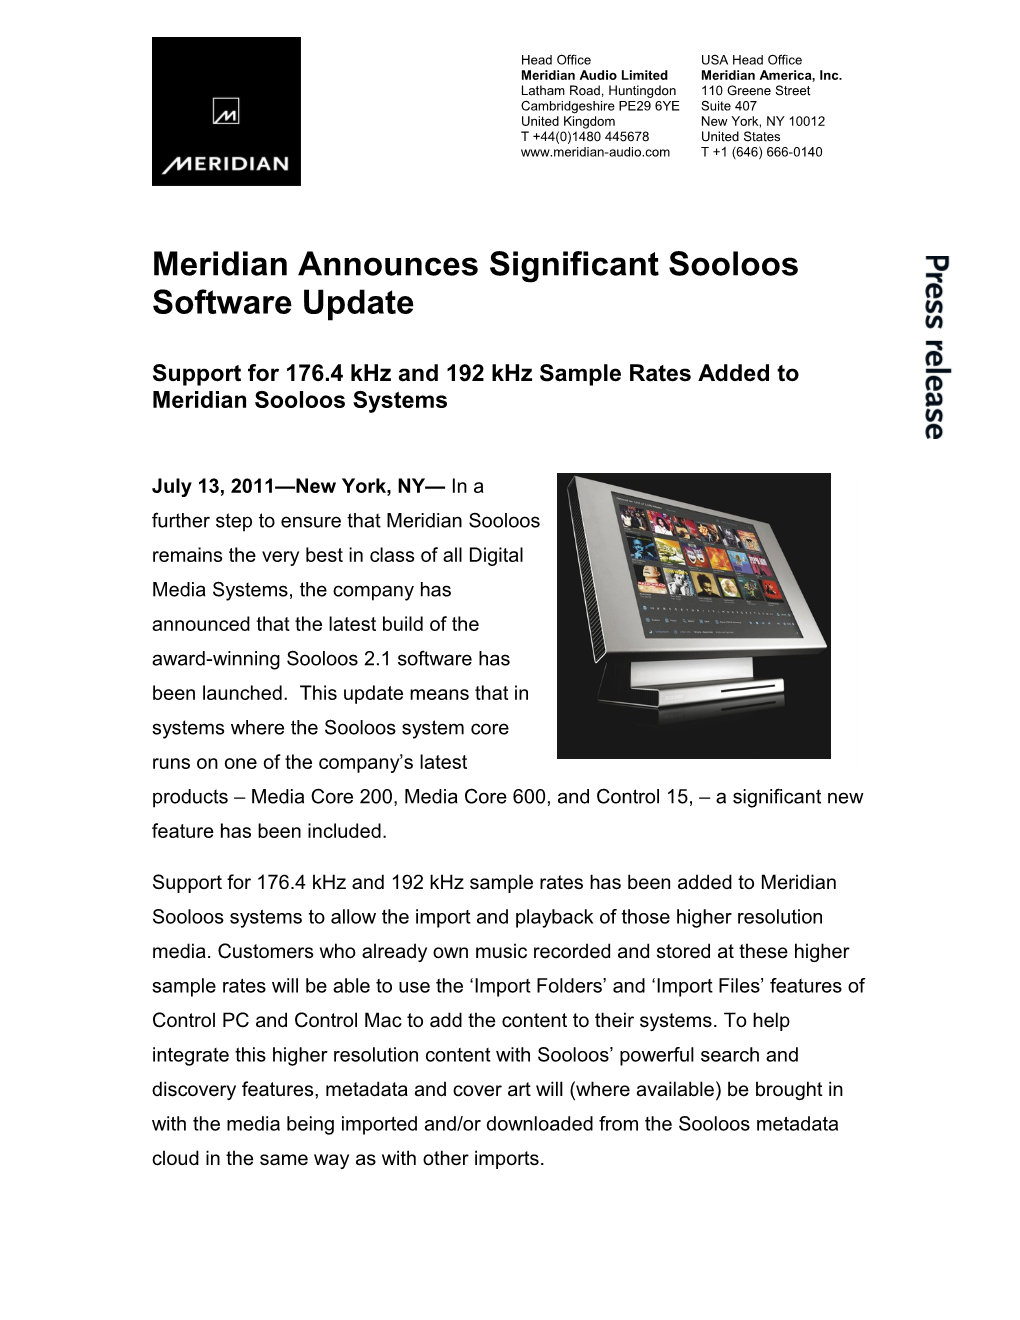 Meridian Announces Significant Sooloos Software Update